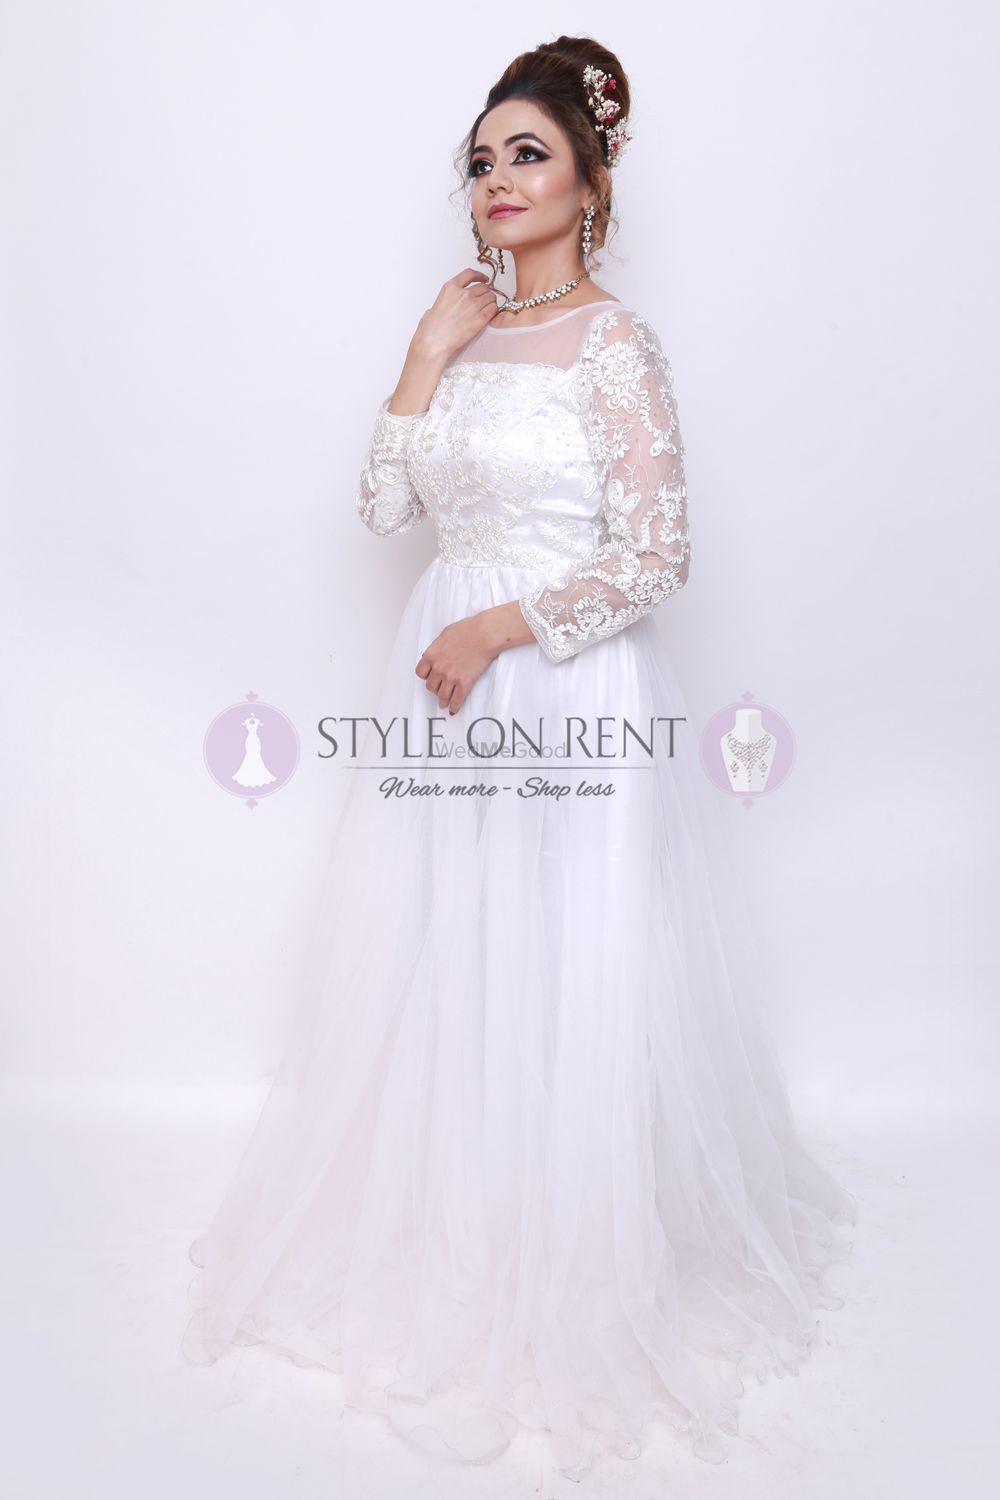 Photo By Styles On Rent - Bridal Wear